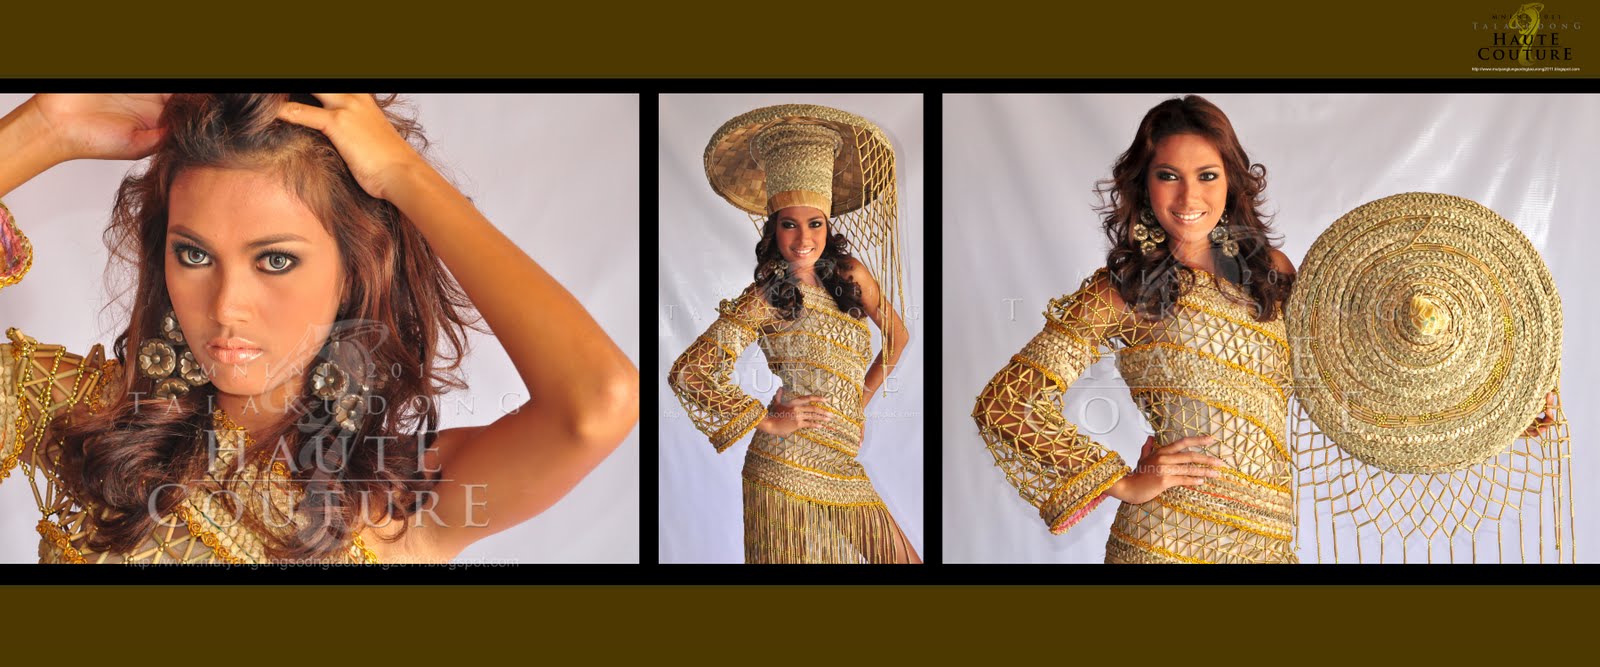 The Road to Binibining Pilipinas 2012 - Page 3 Campus+Art+Couture